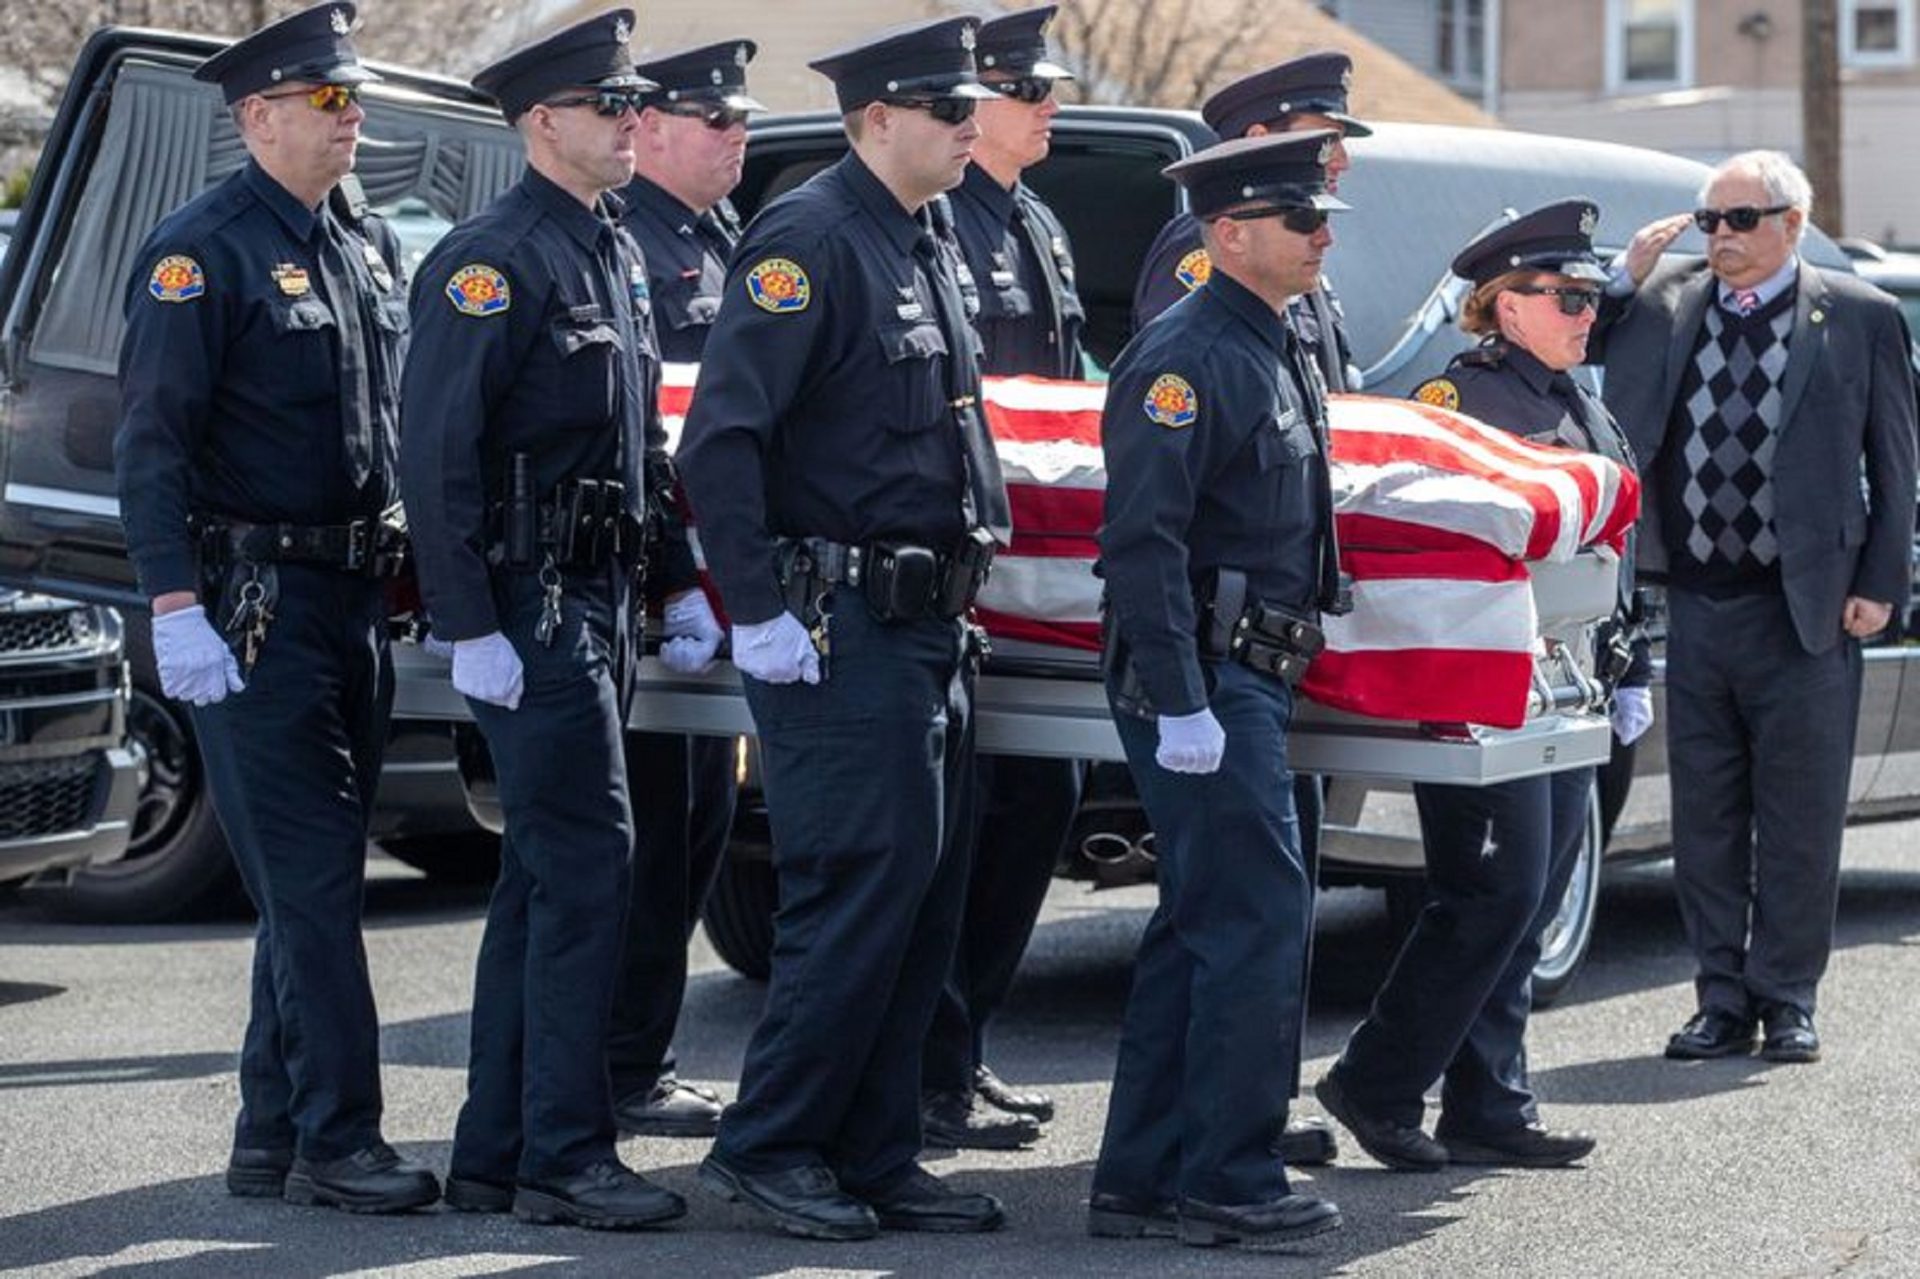 A Lebanon Police honor guard removes the casket of slain officer Lt. William Lebo, after an autopsy in Allentown, to the Christman’s Funeral Home in Lebanon, Pa,